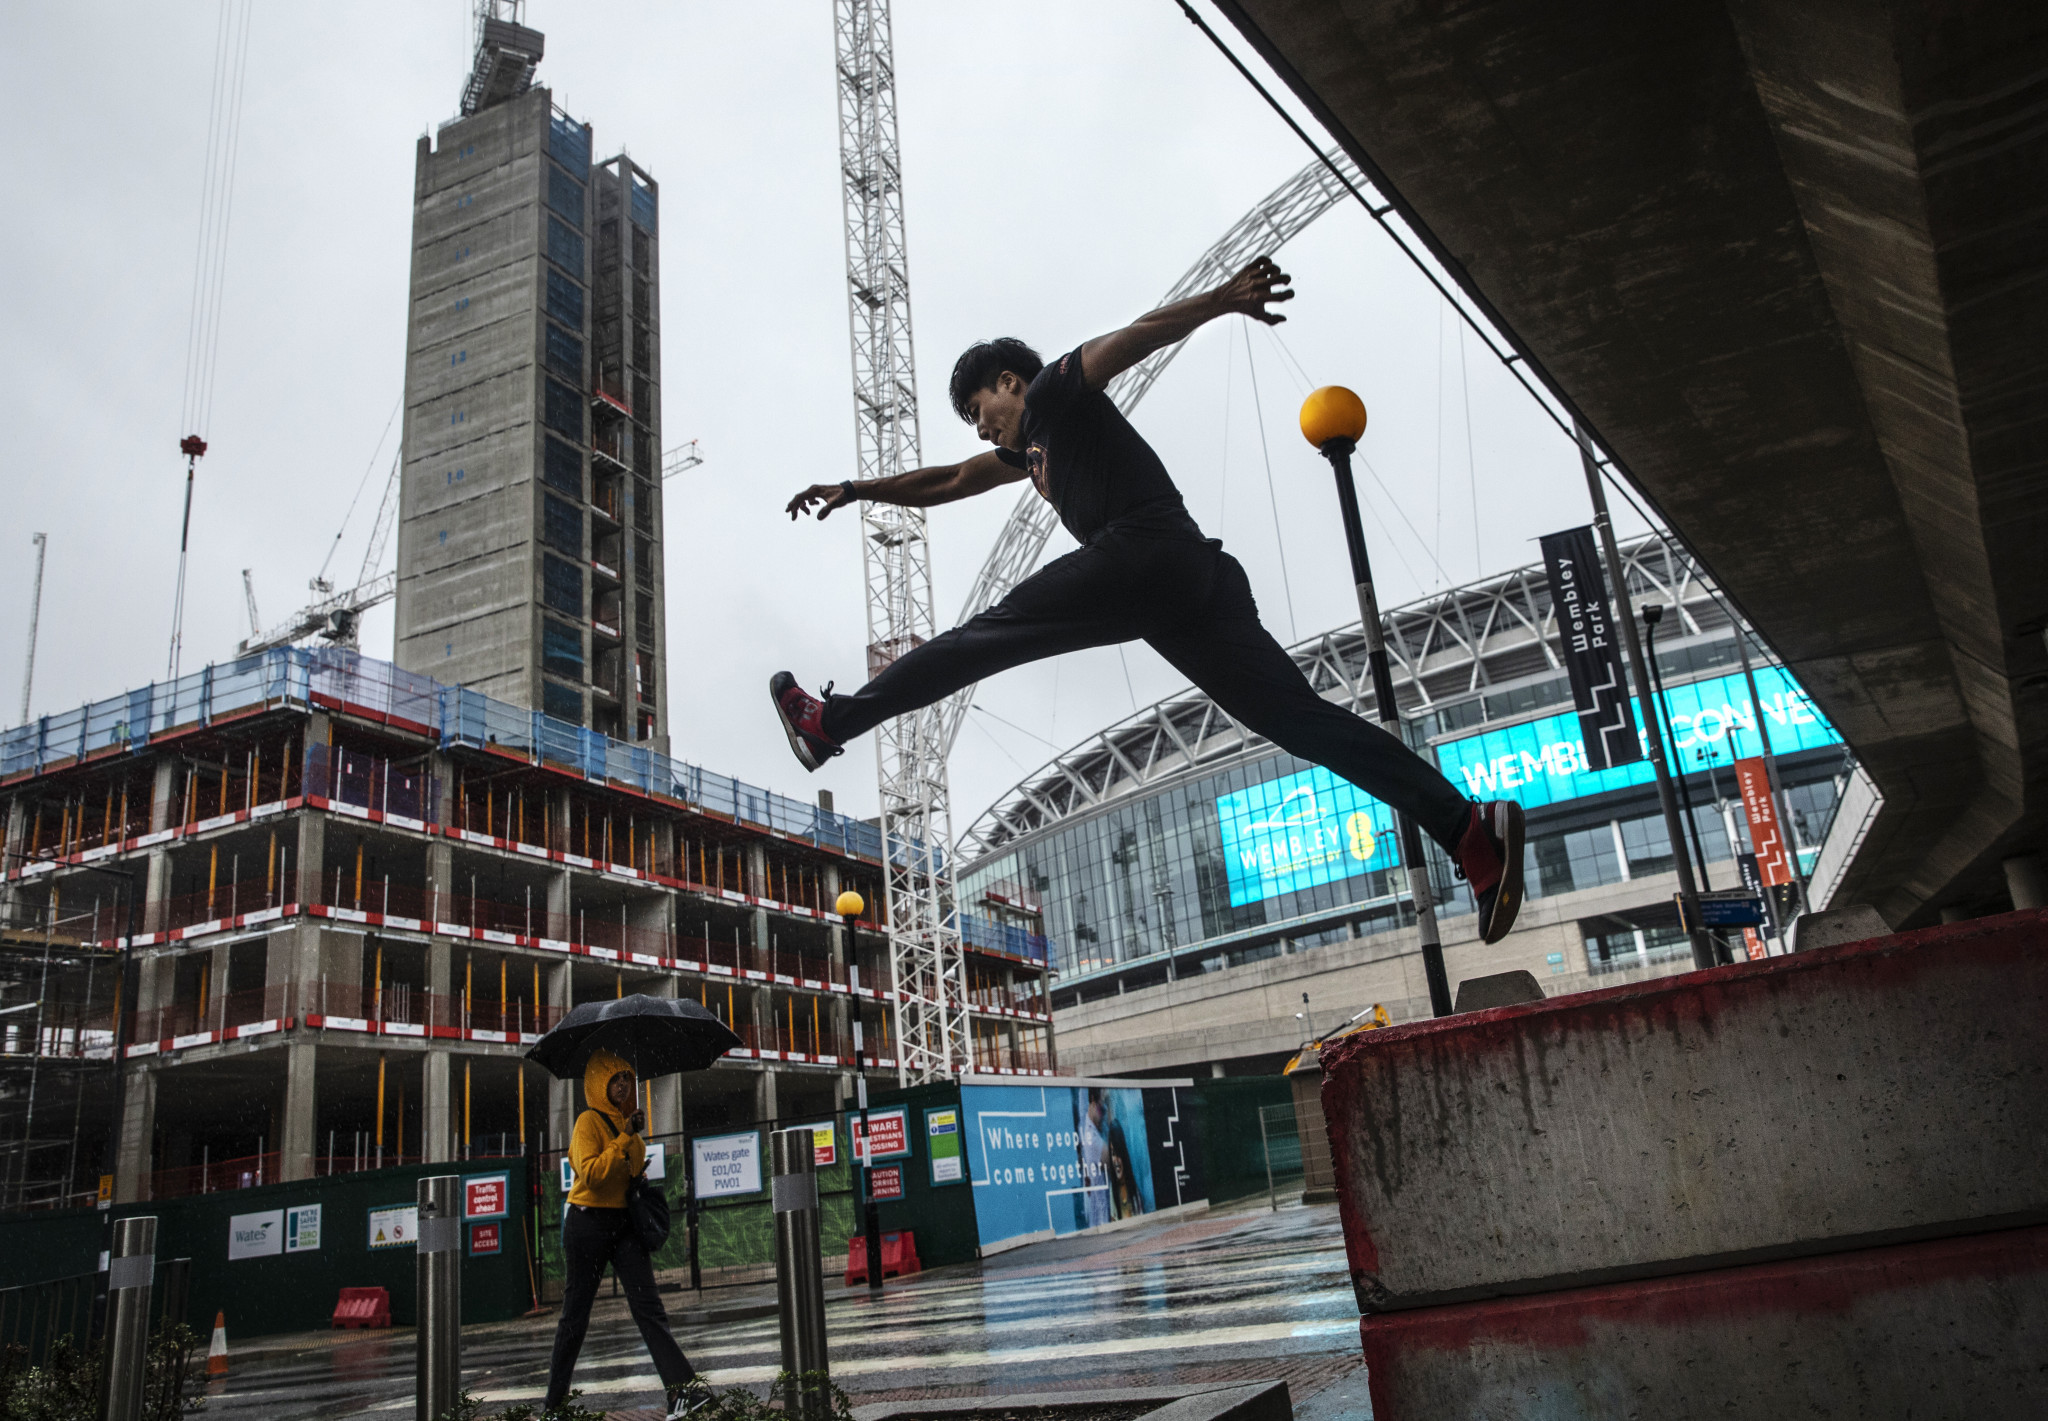 FIG has taken numerous steps in its attempt to take ownership of parkour ©Getty Images